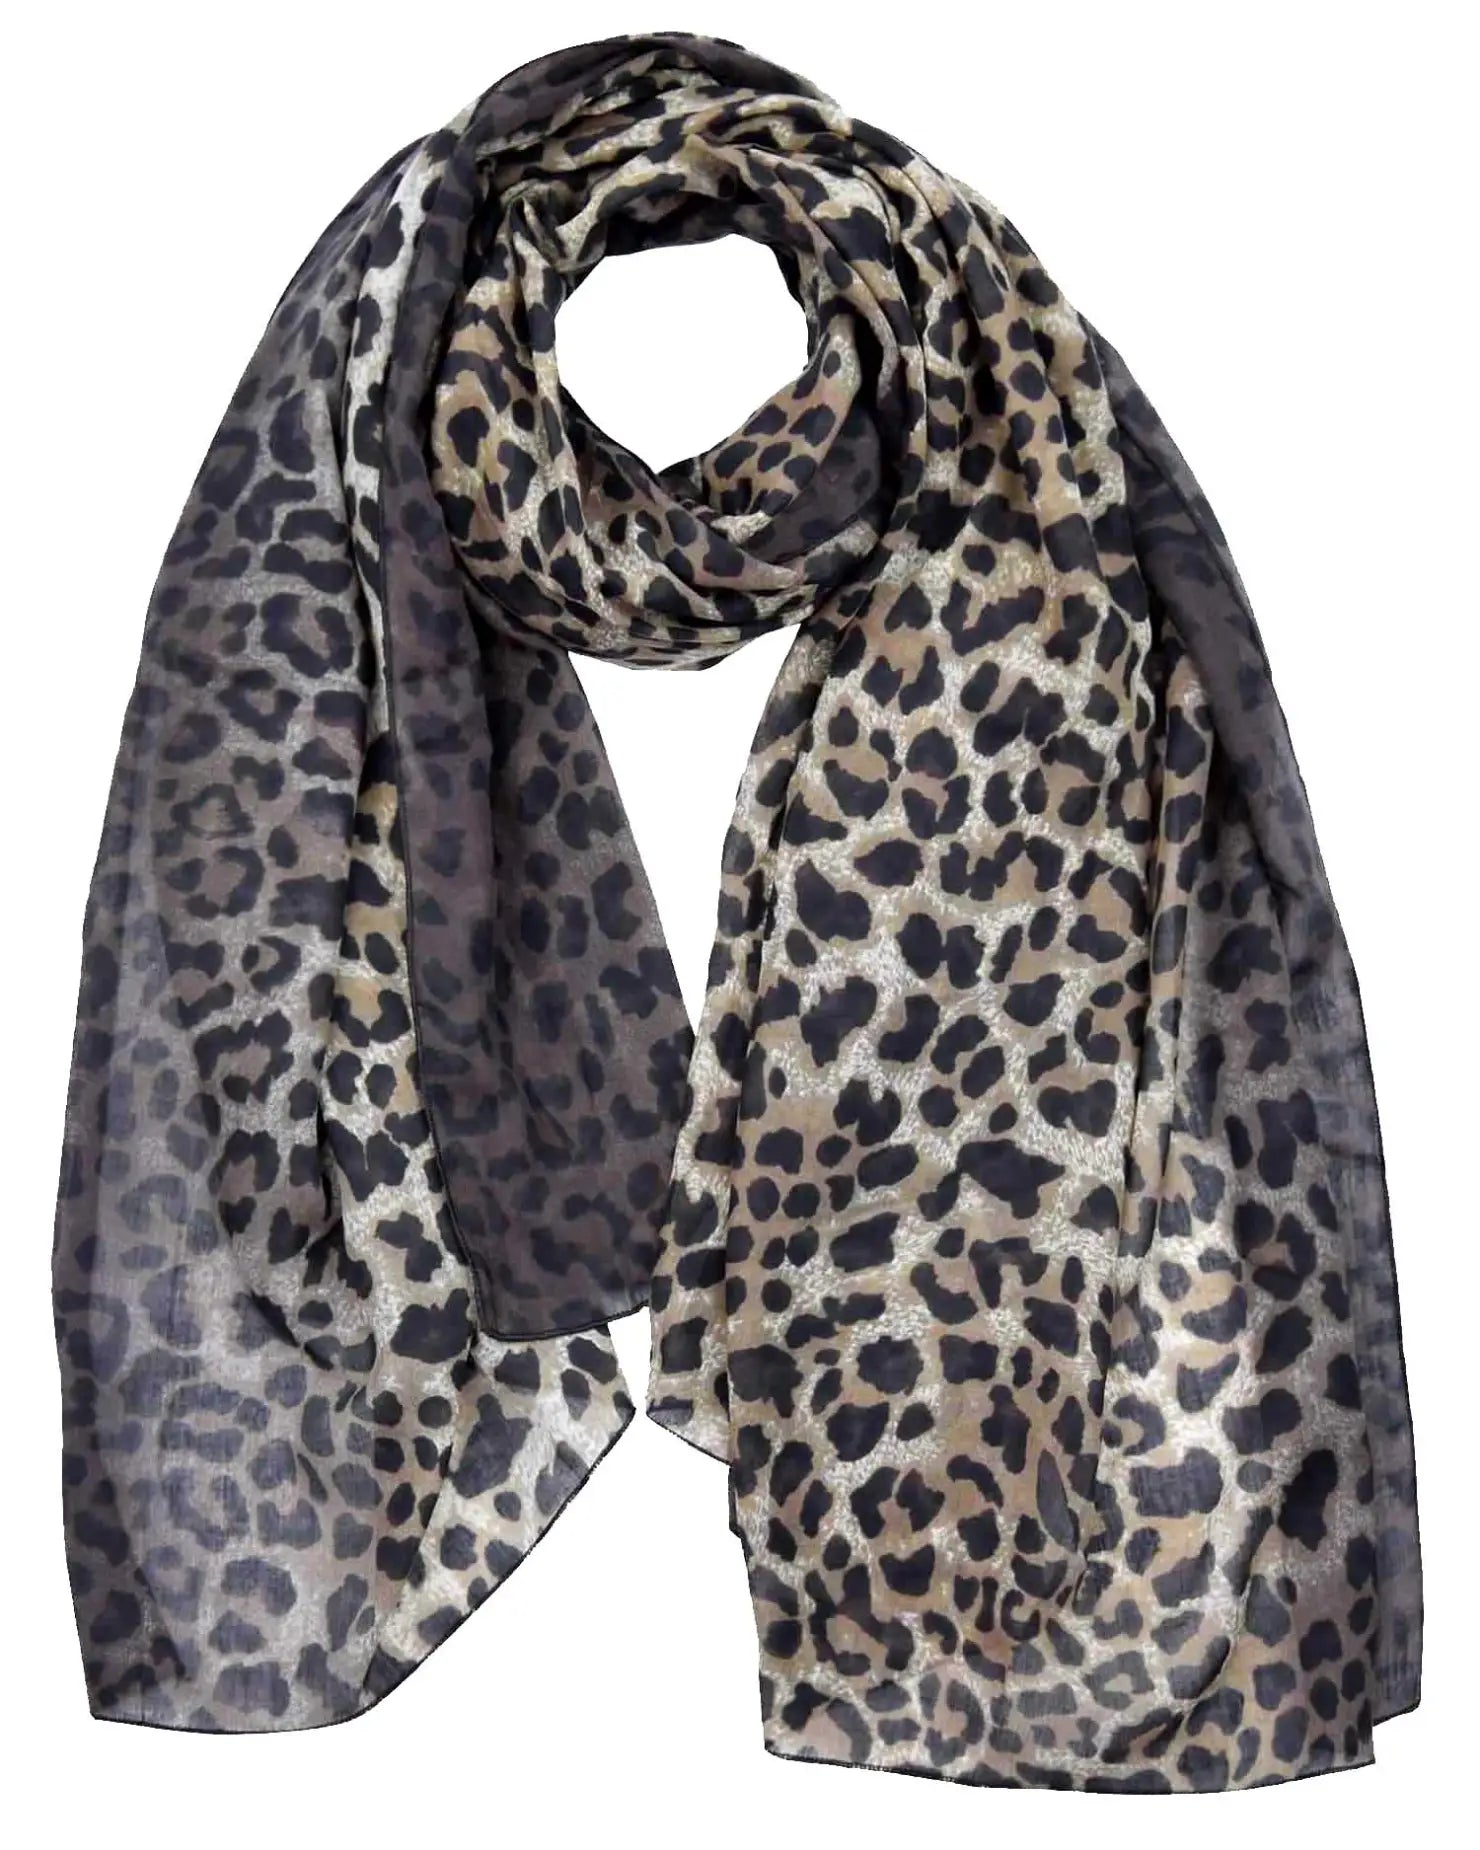 Ombre leopard print oversized scarf